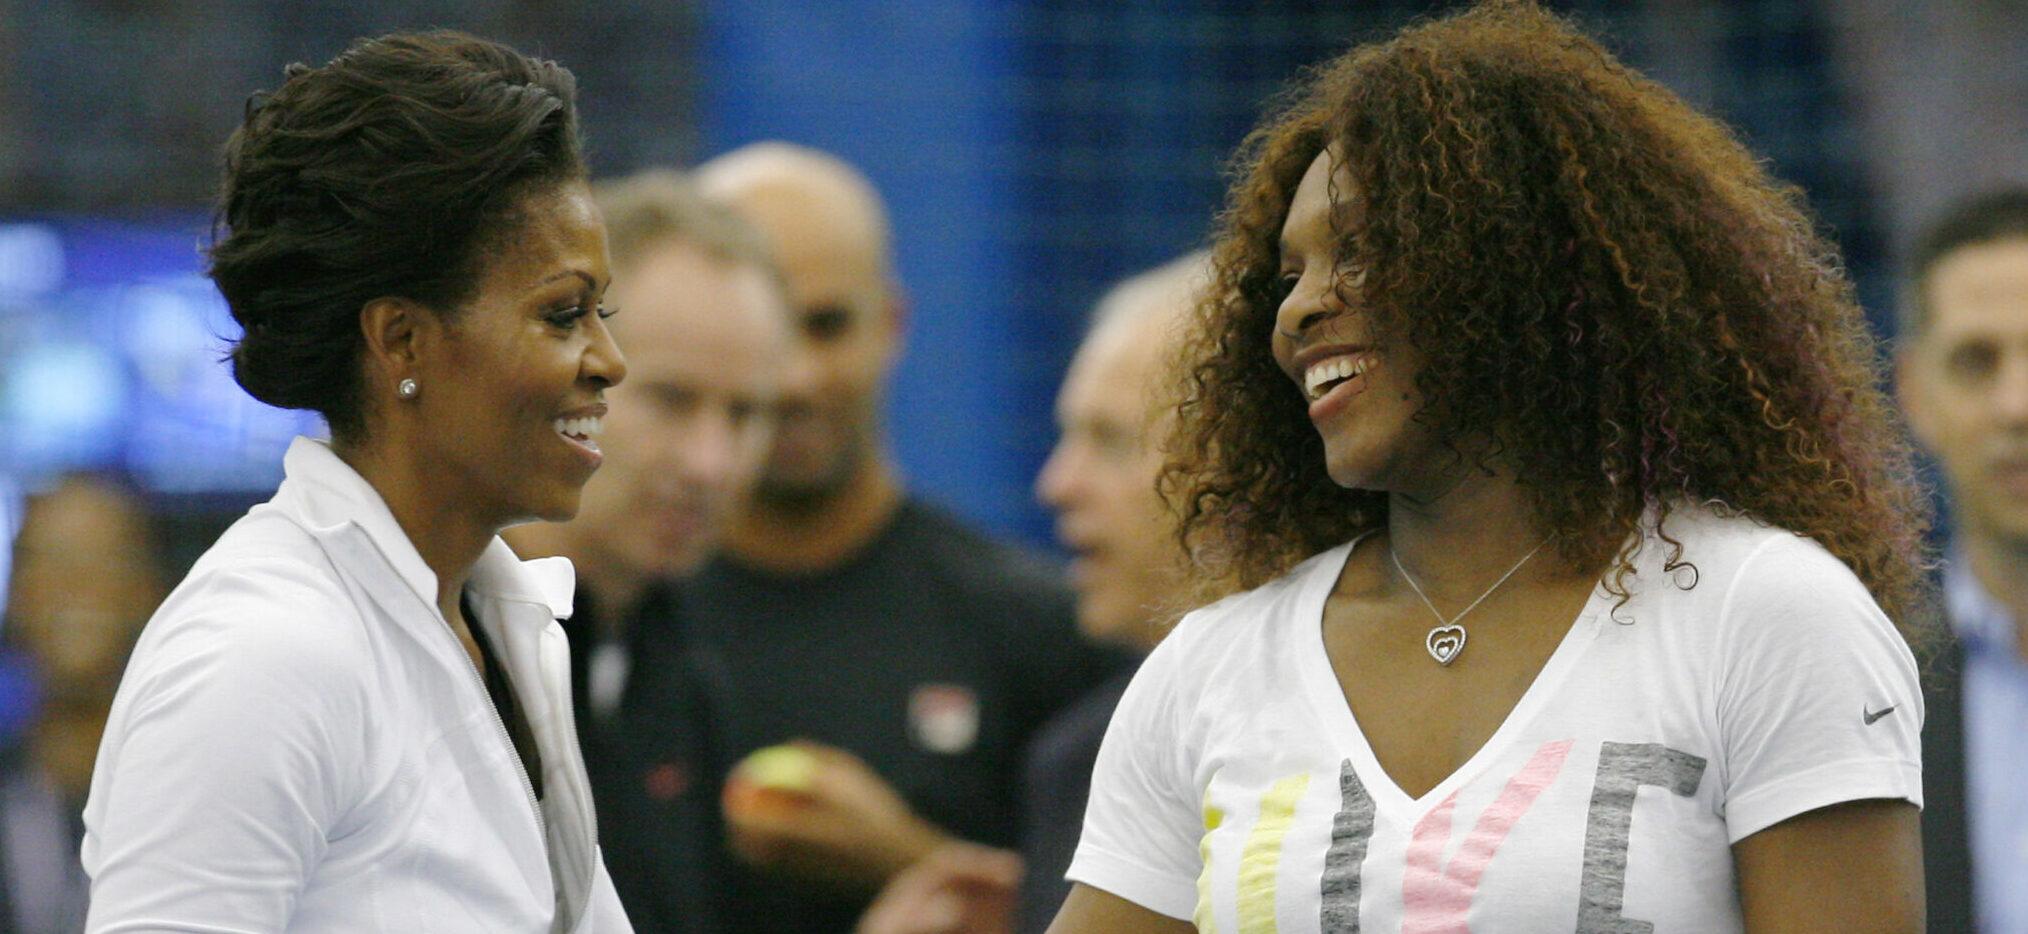 How Does Michelle Obama Feel About Serena Williams’ Retirement Announcement?